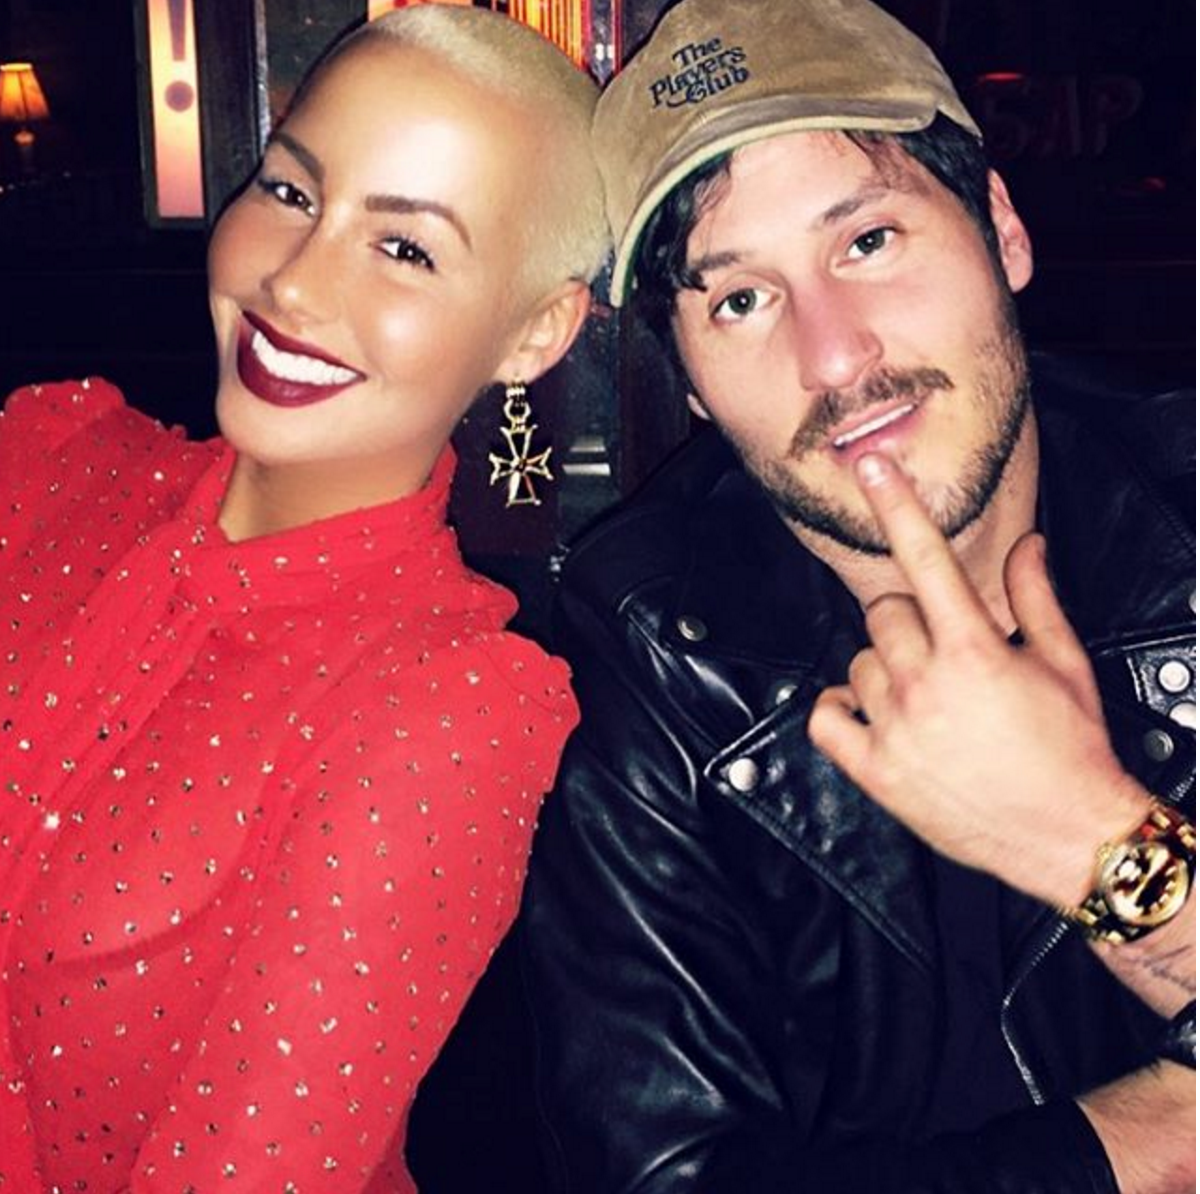 6 Things to Know About Amber Rose's New Boyfriend Val Chmerovshiky